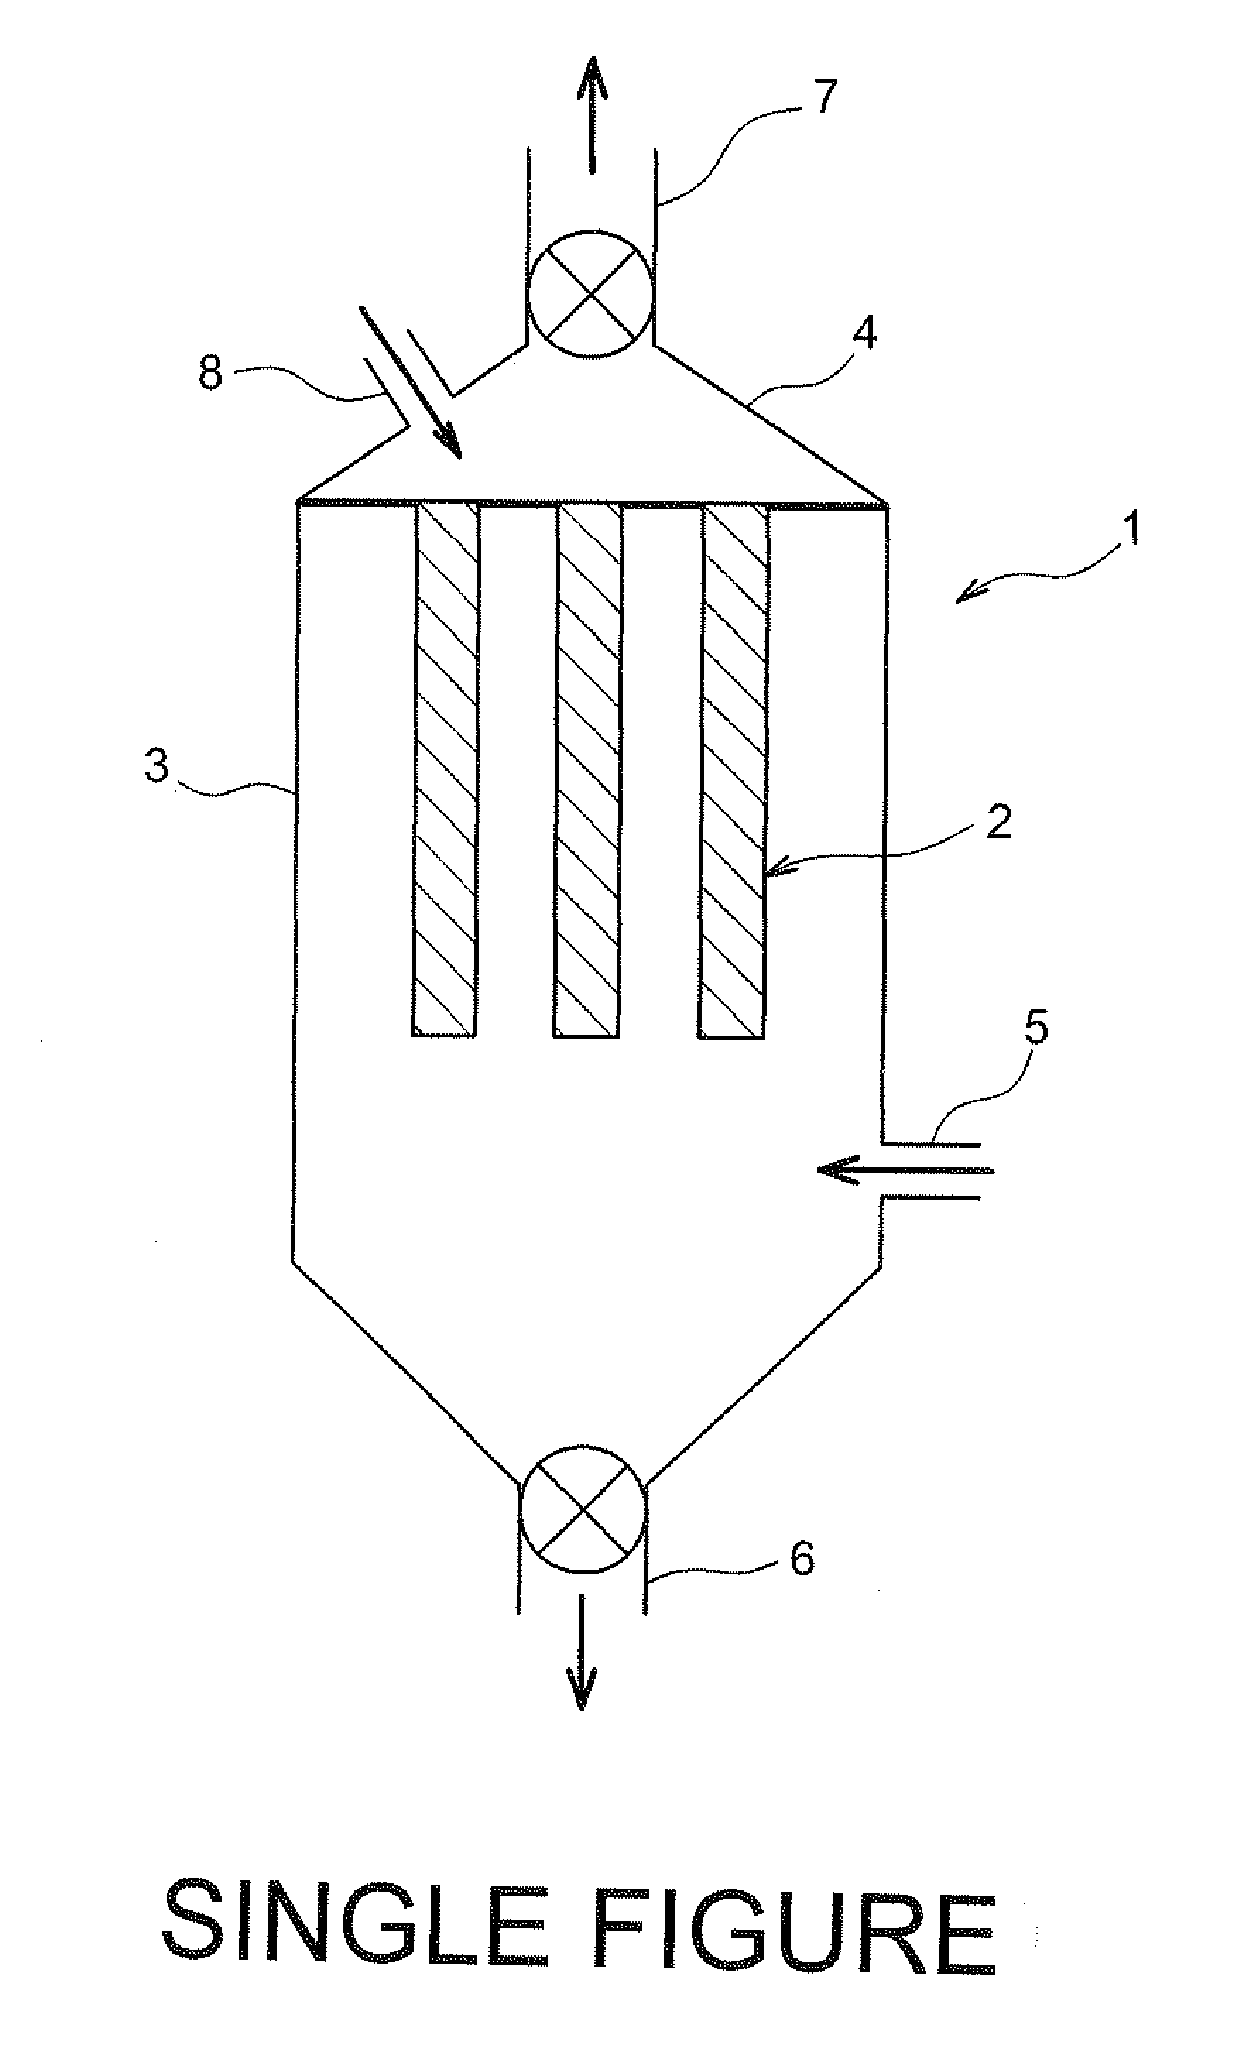 Device and method for producing suspensions or wet pastes of nanopowders or ultra-fine powders